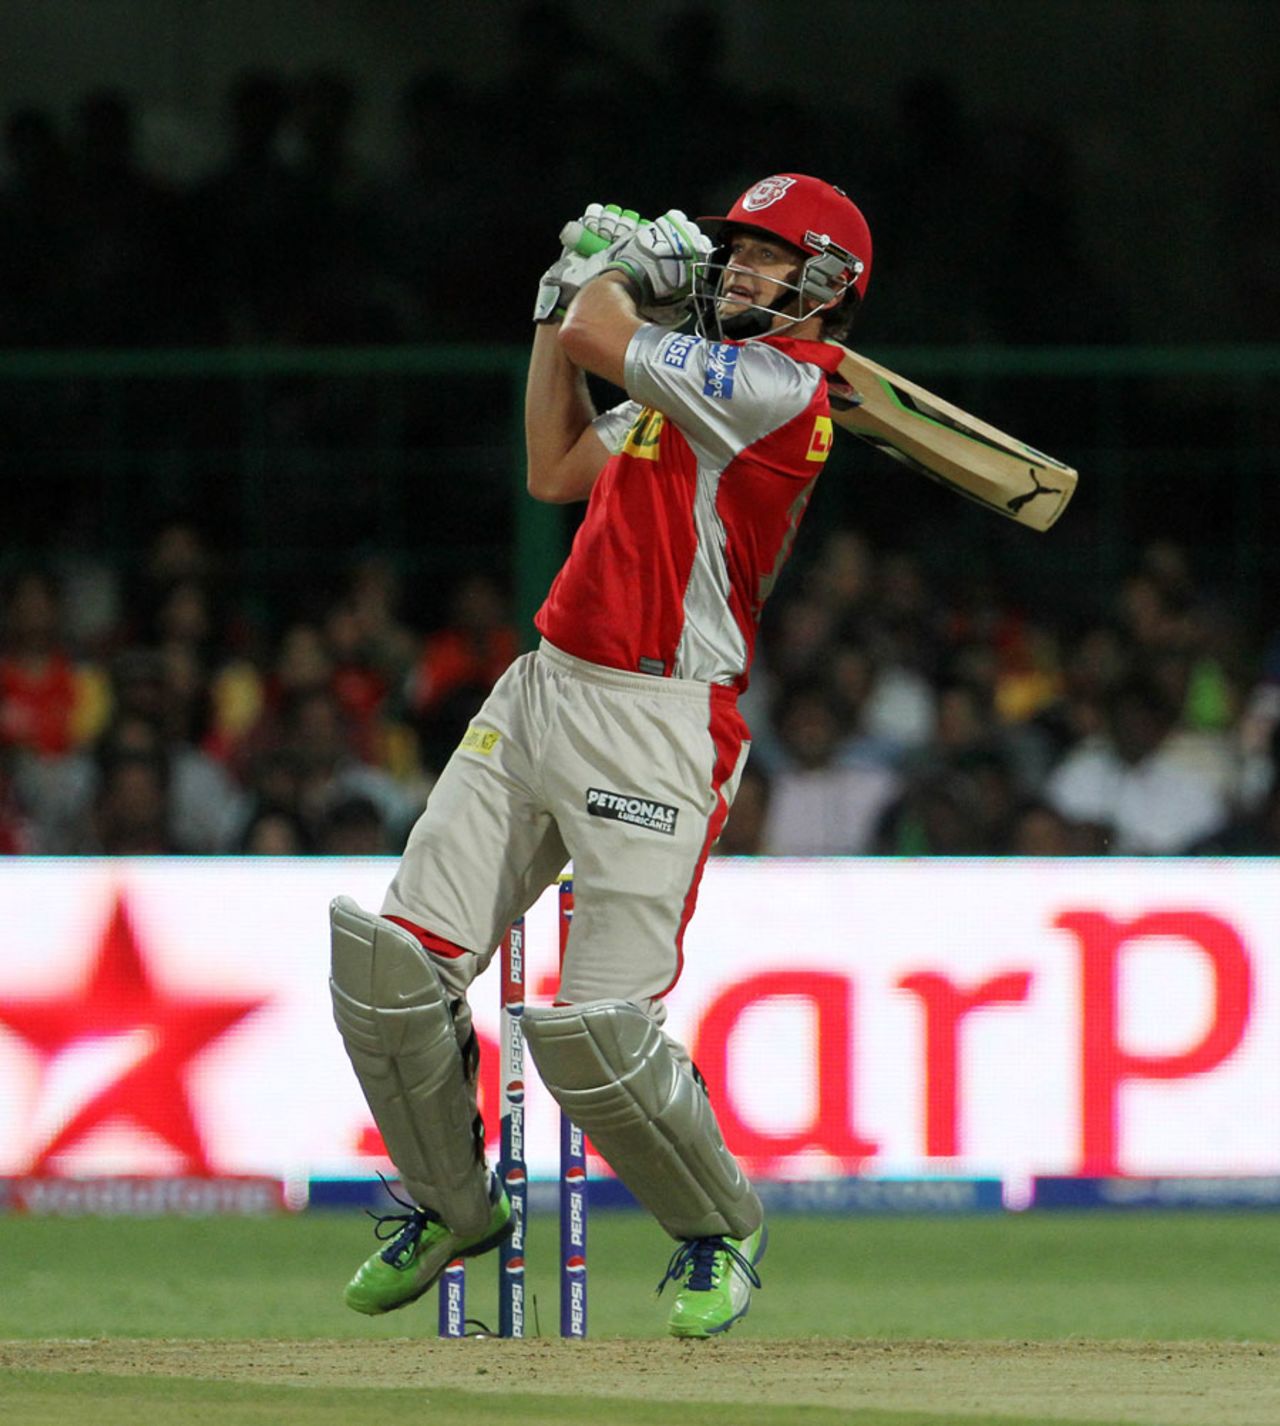 Adam Gilchrist plays a pull shot for four, Royal Challengers Bangalore v Kings XI Punjab, IPL 2013, Bangalore, May 14, 2013